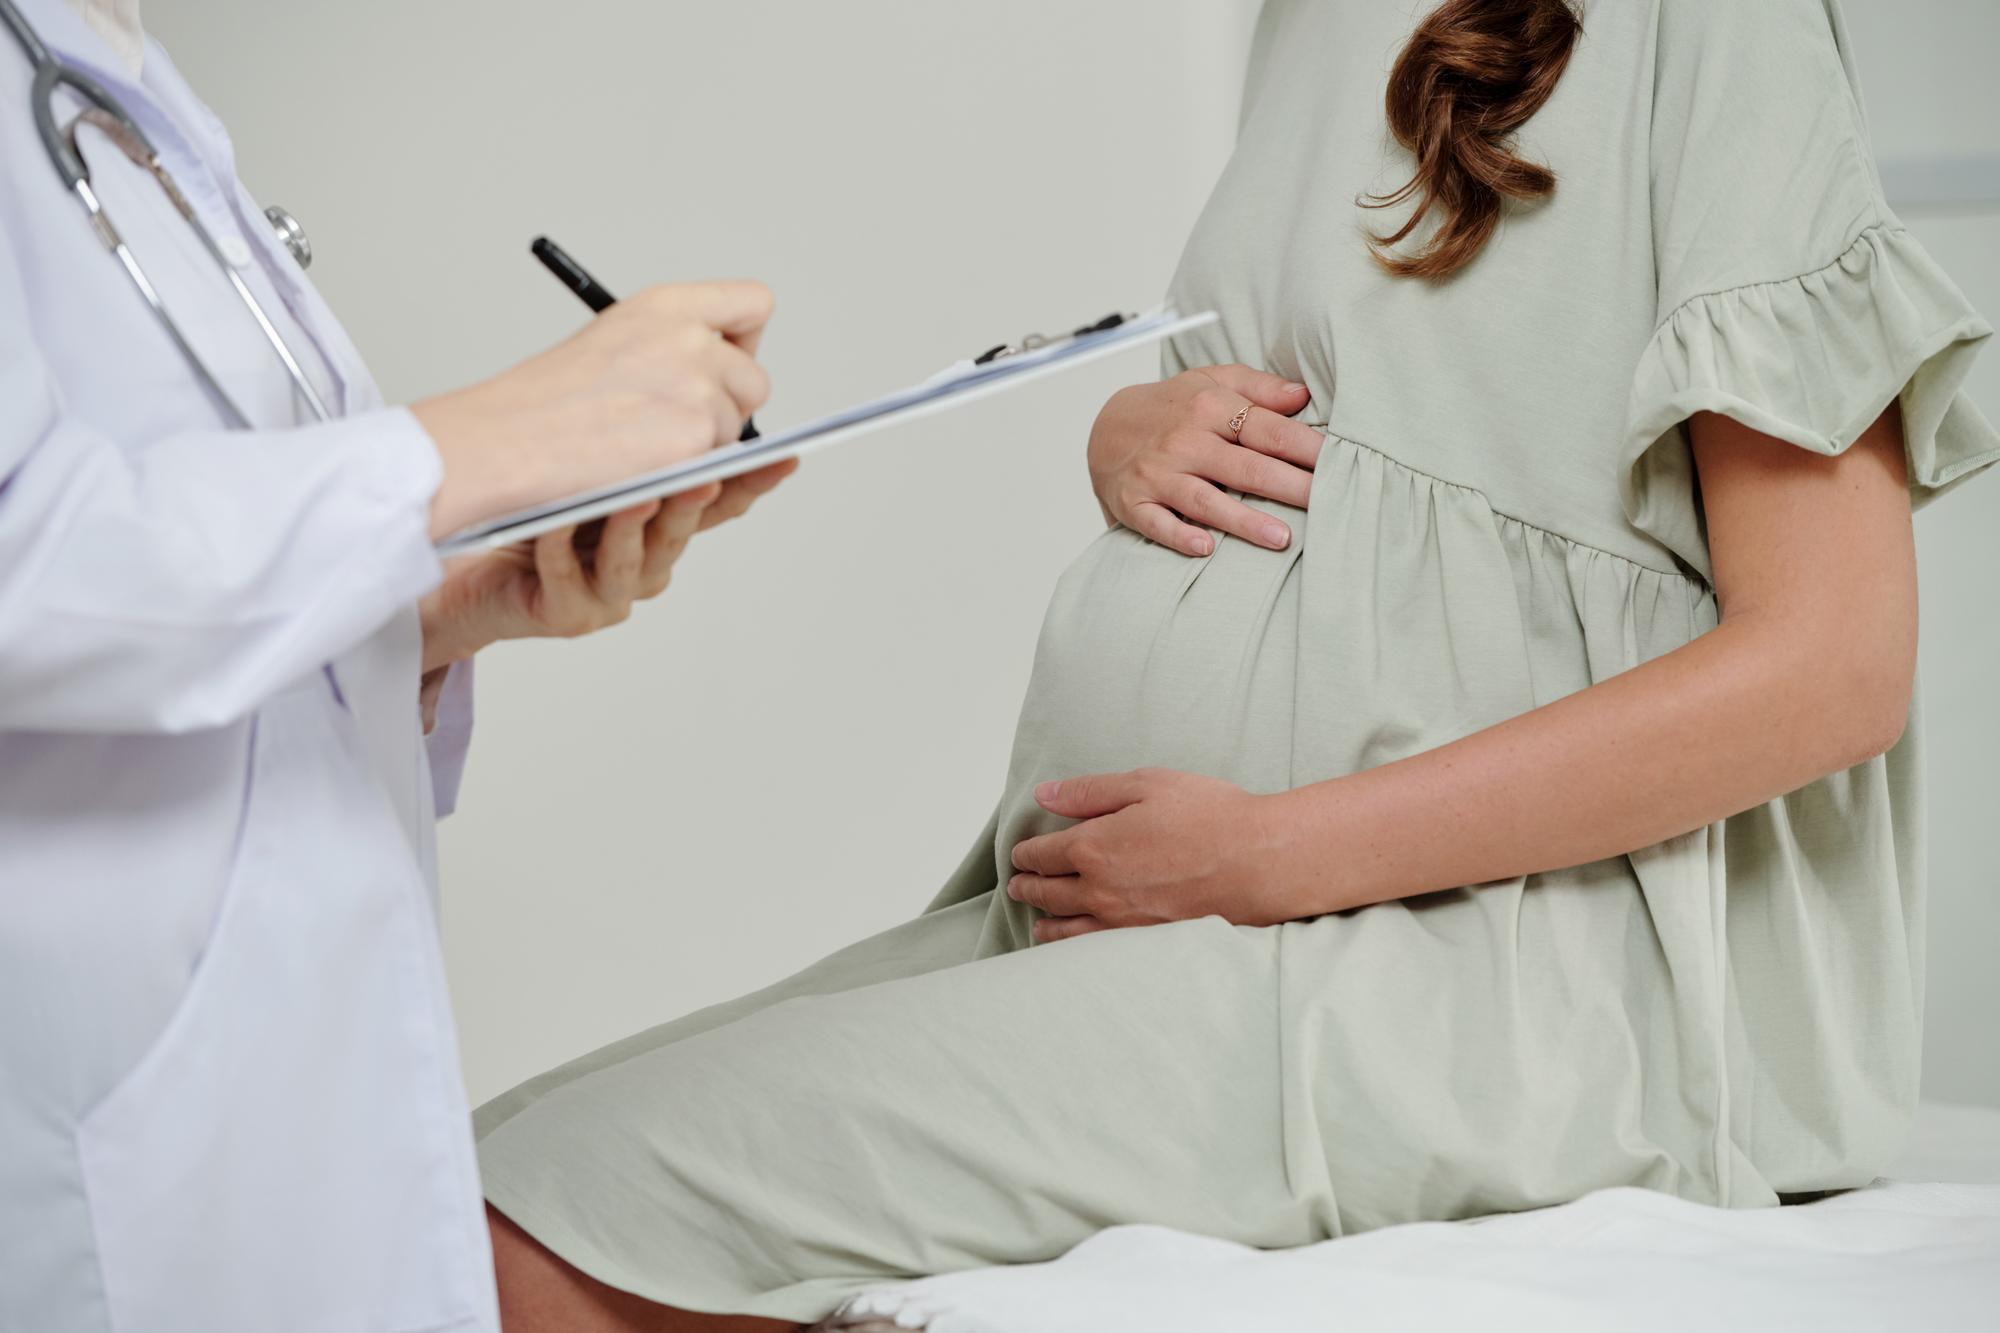 Requirements for surrogate mothers